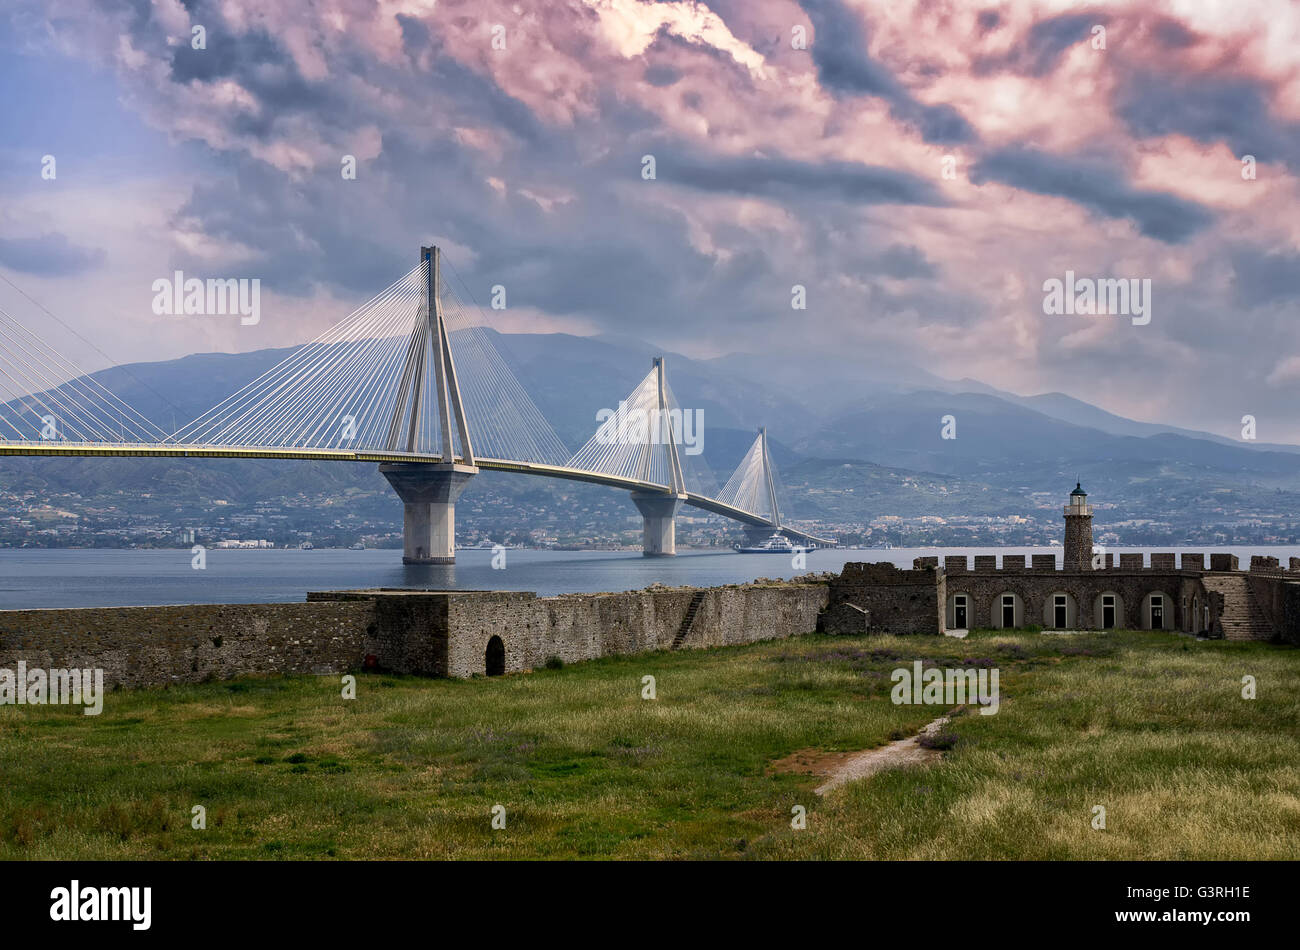 The cable bridge between Rio and Atnirrio, Greece, and the old fortress, at dusk Stock Photo